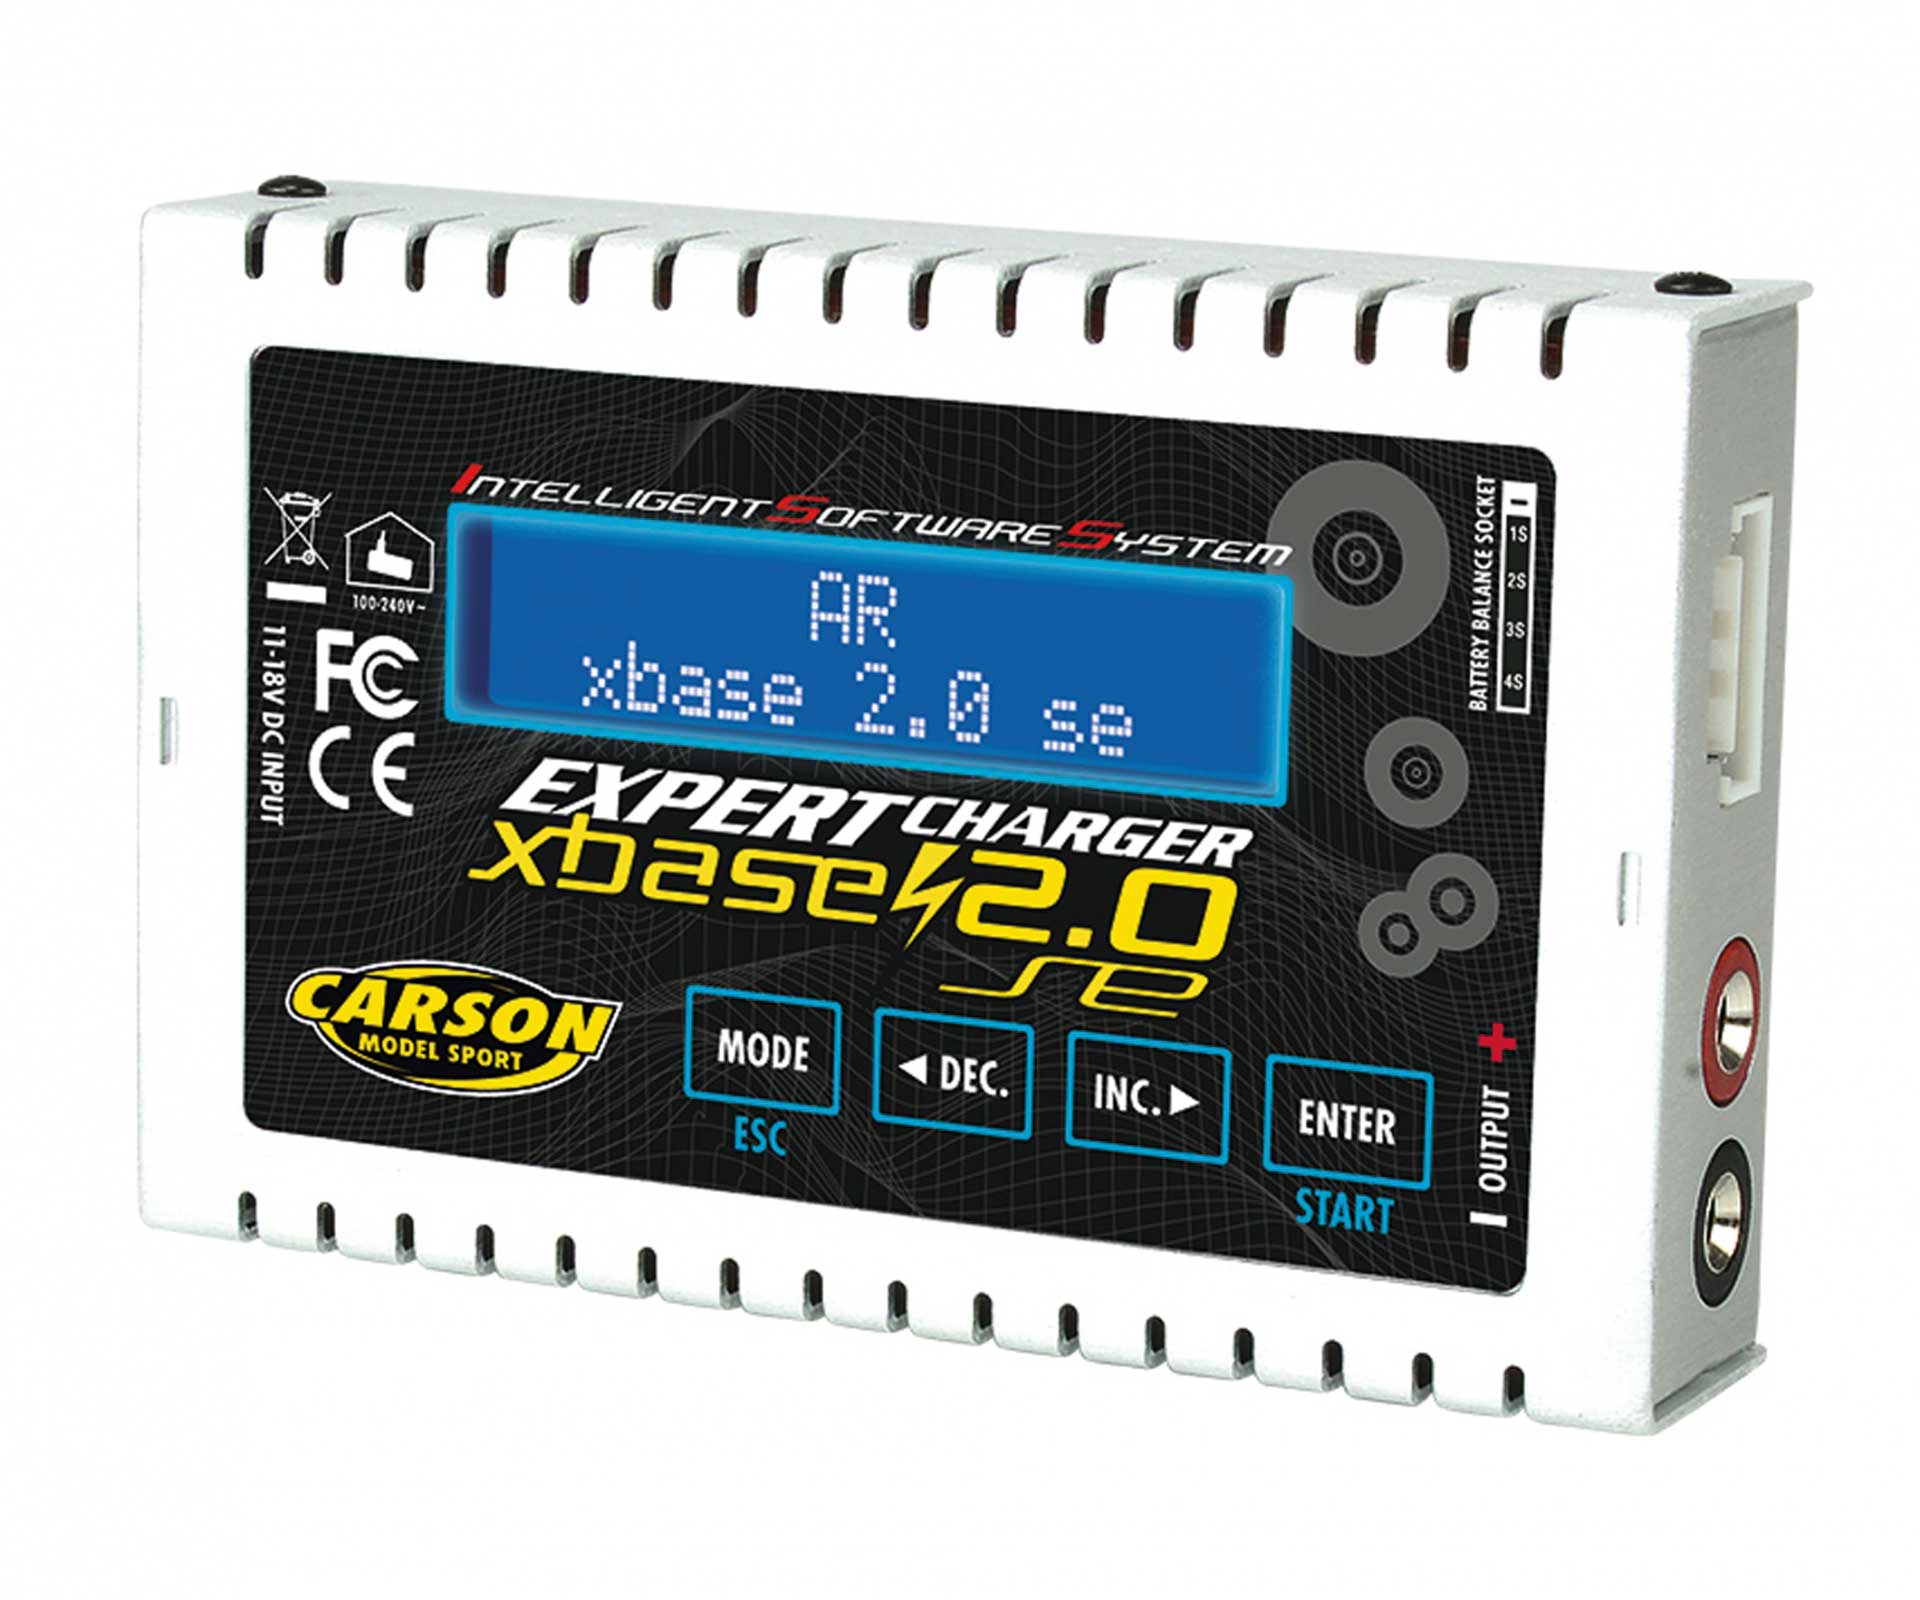 CARSON Expert Charger xBase 2.0 se